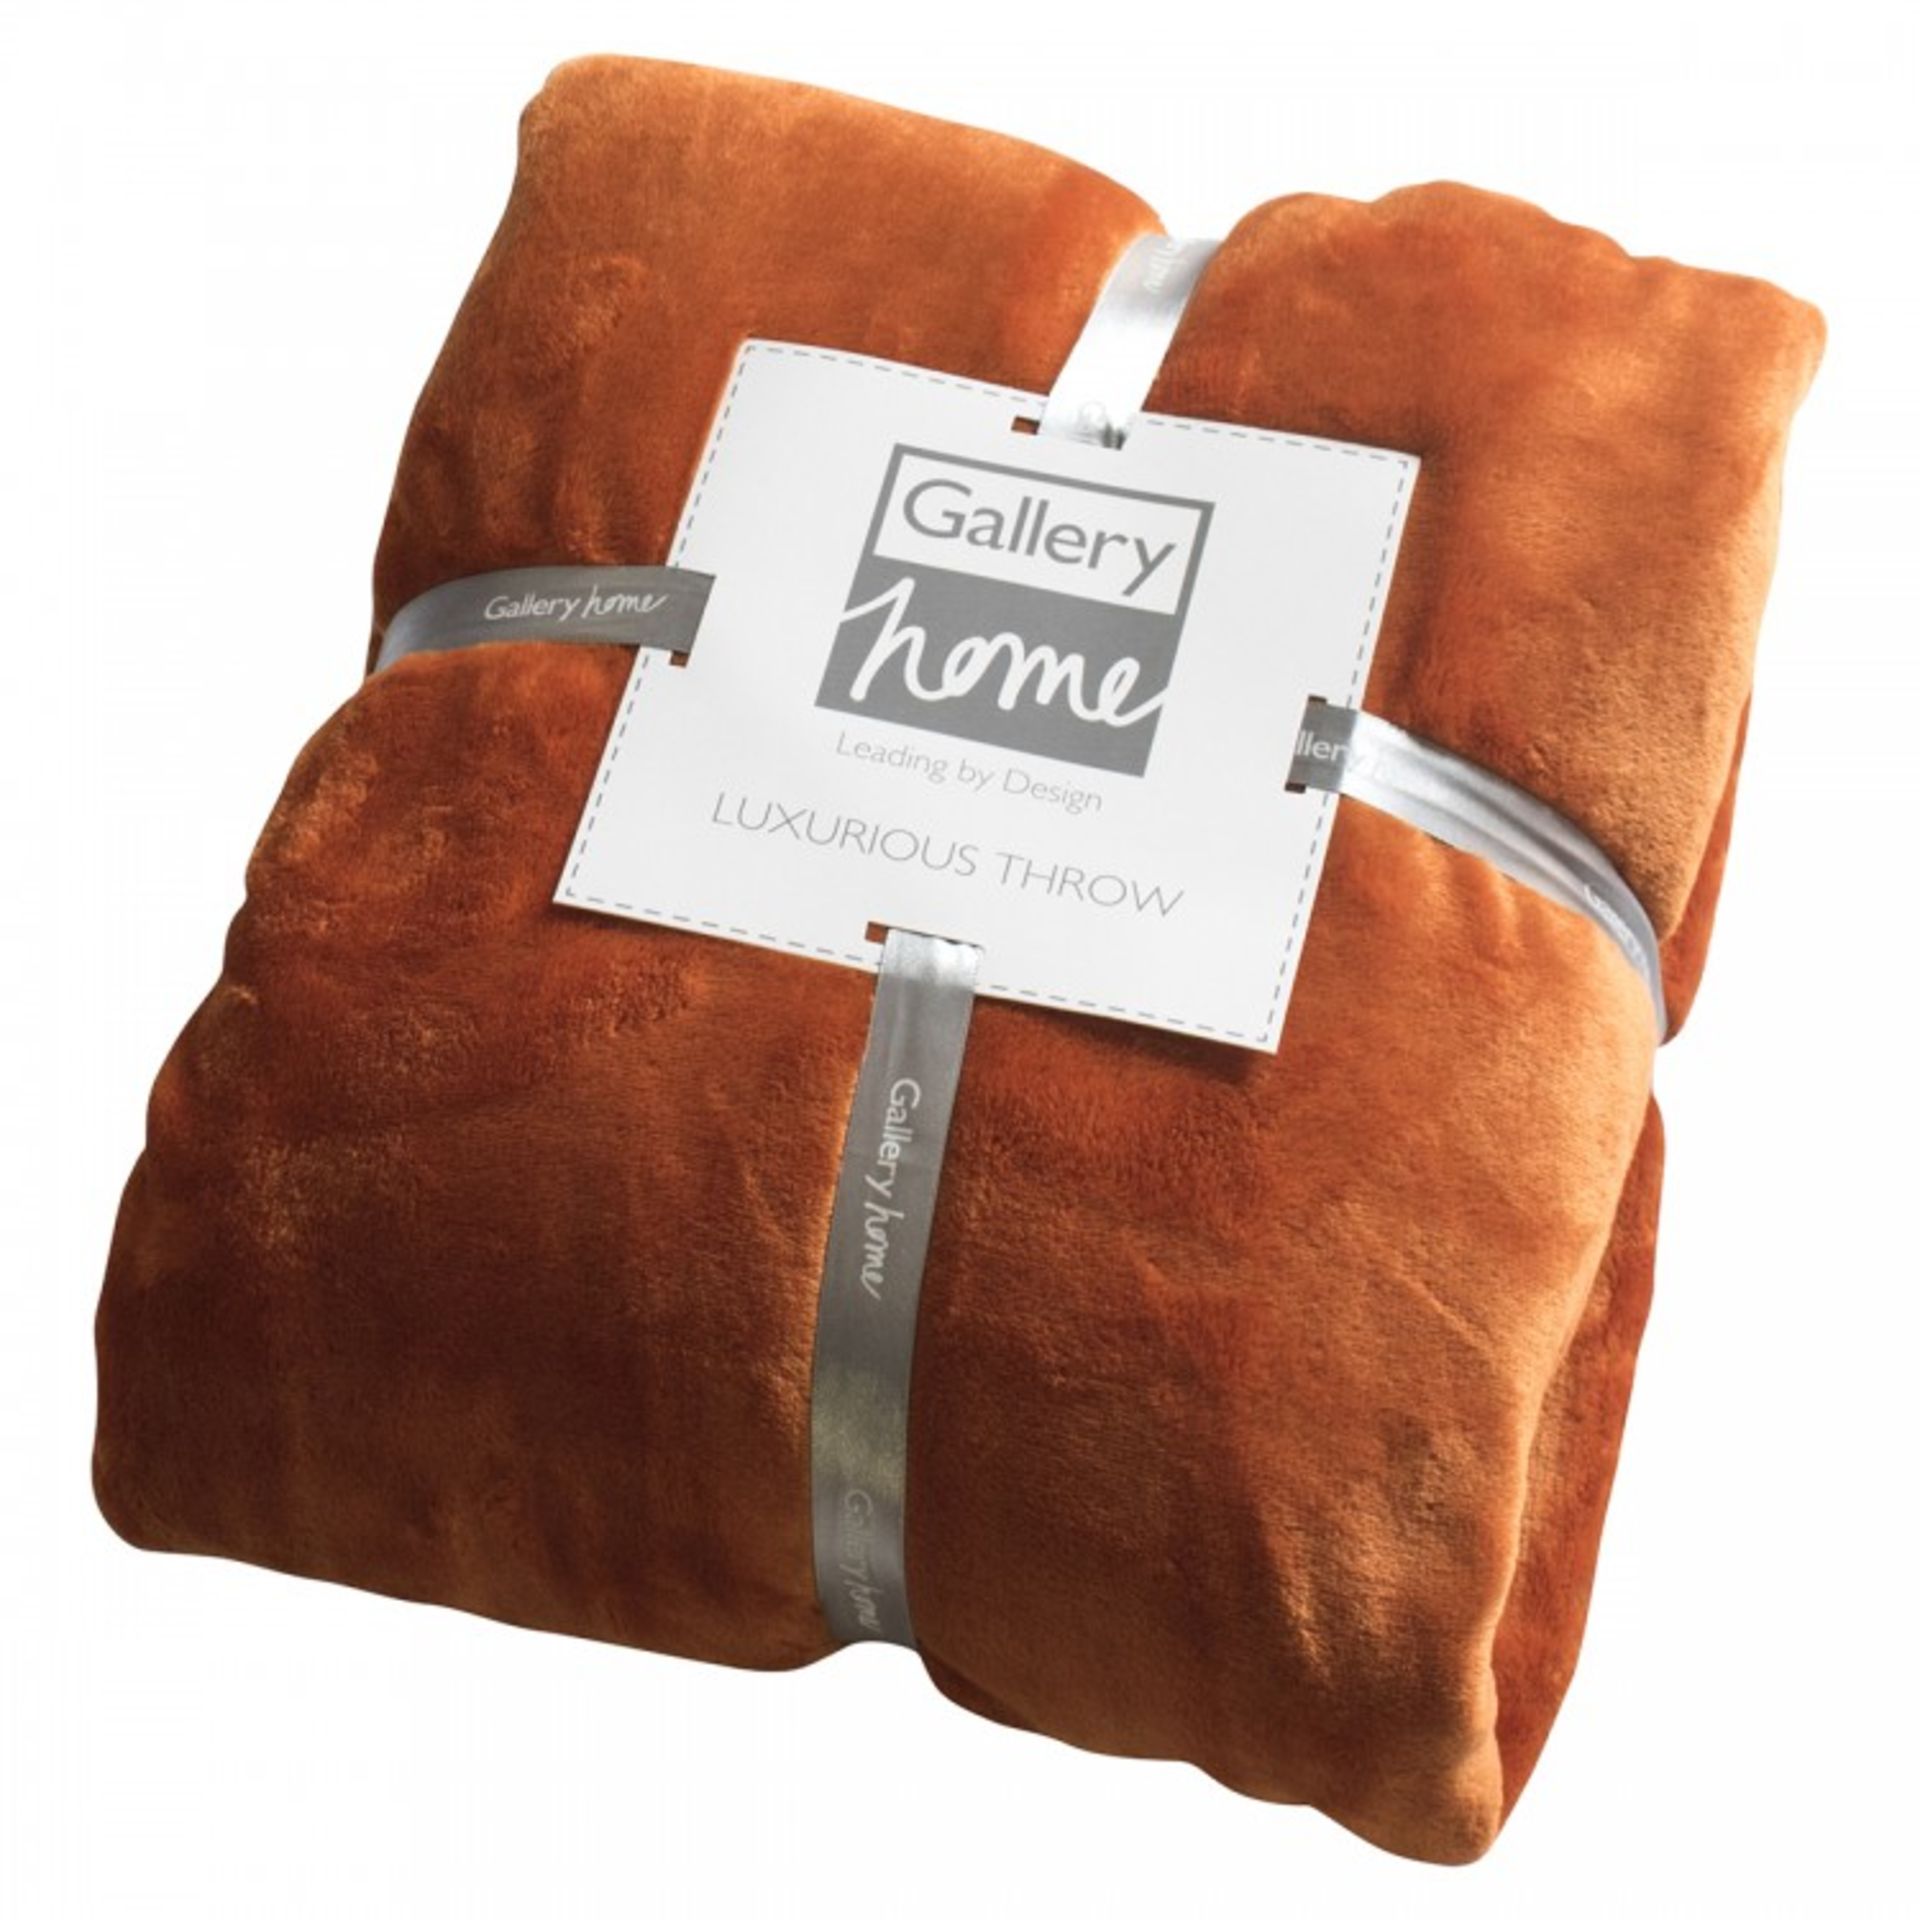 Flannel Fleece Throw Chilli Kilburn and Scott Super soft flannel fleece throw fits perfectly as an - Image 2 of 2